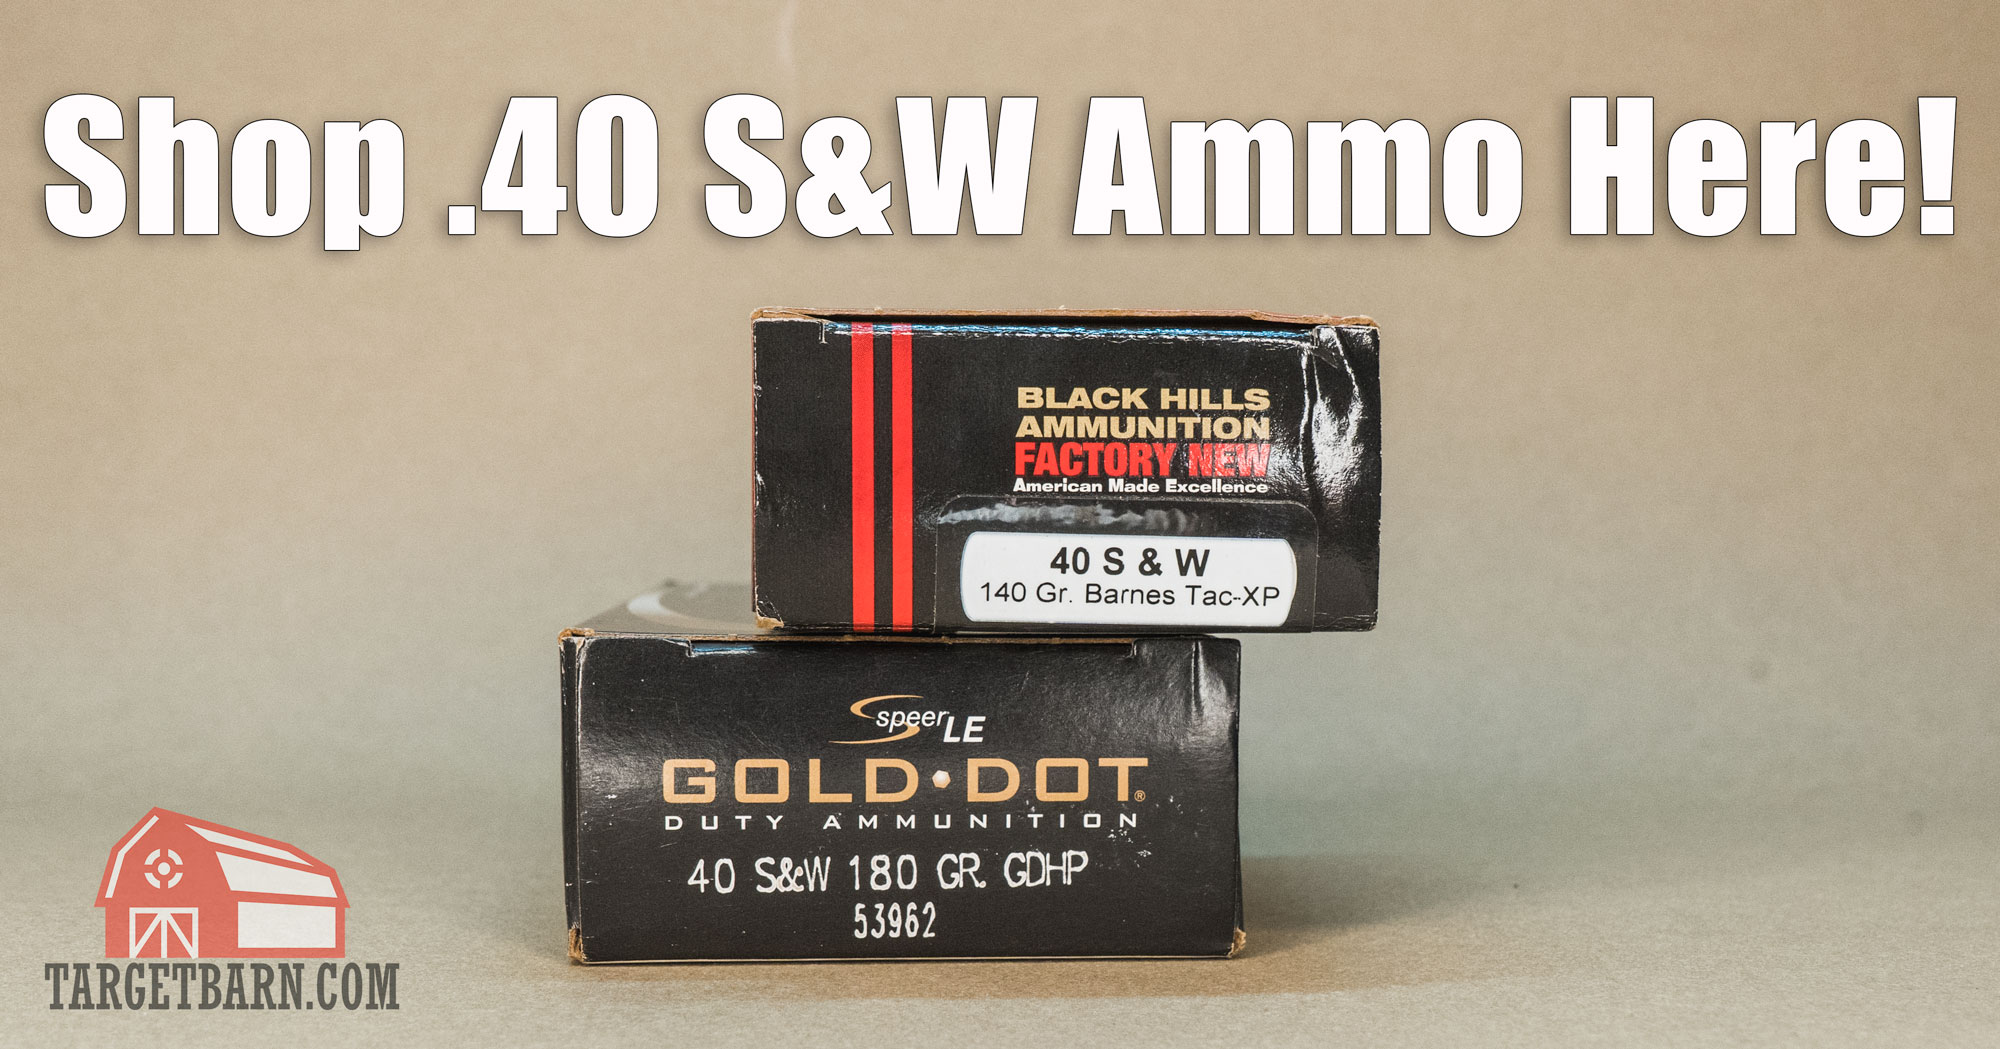 two boxes of 40s&w ammo and the text "shop .40 s&w ammo here!"